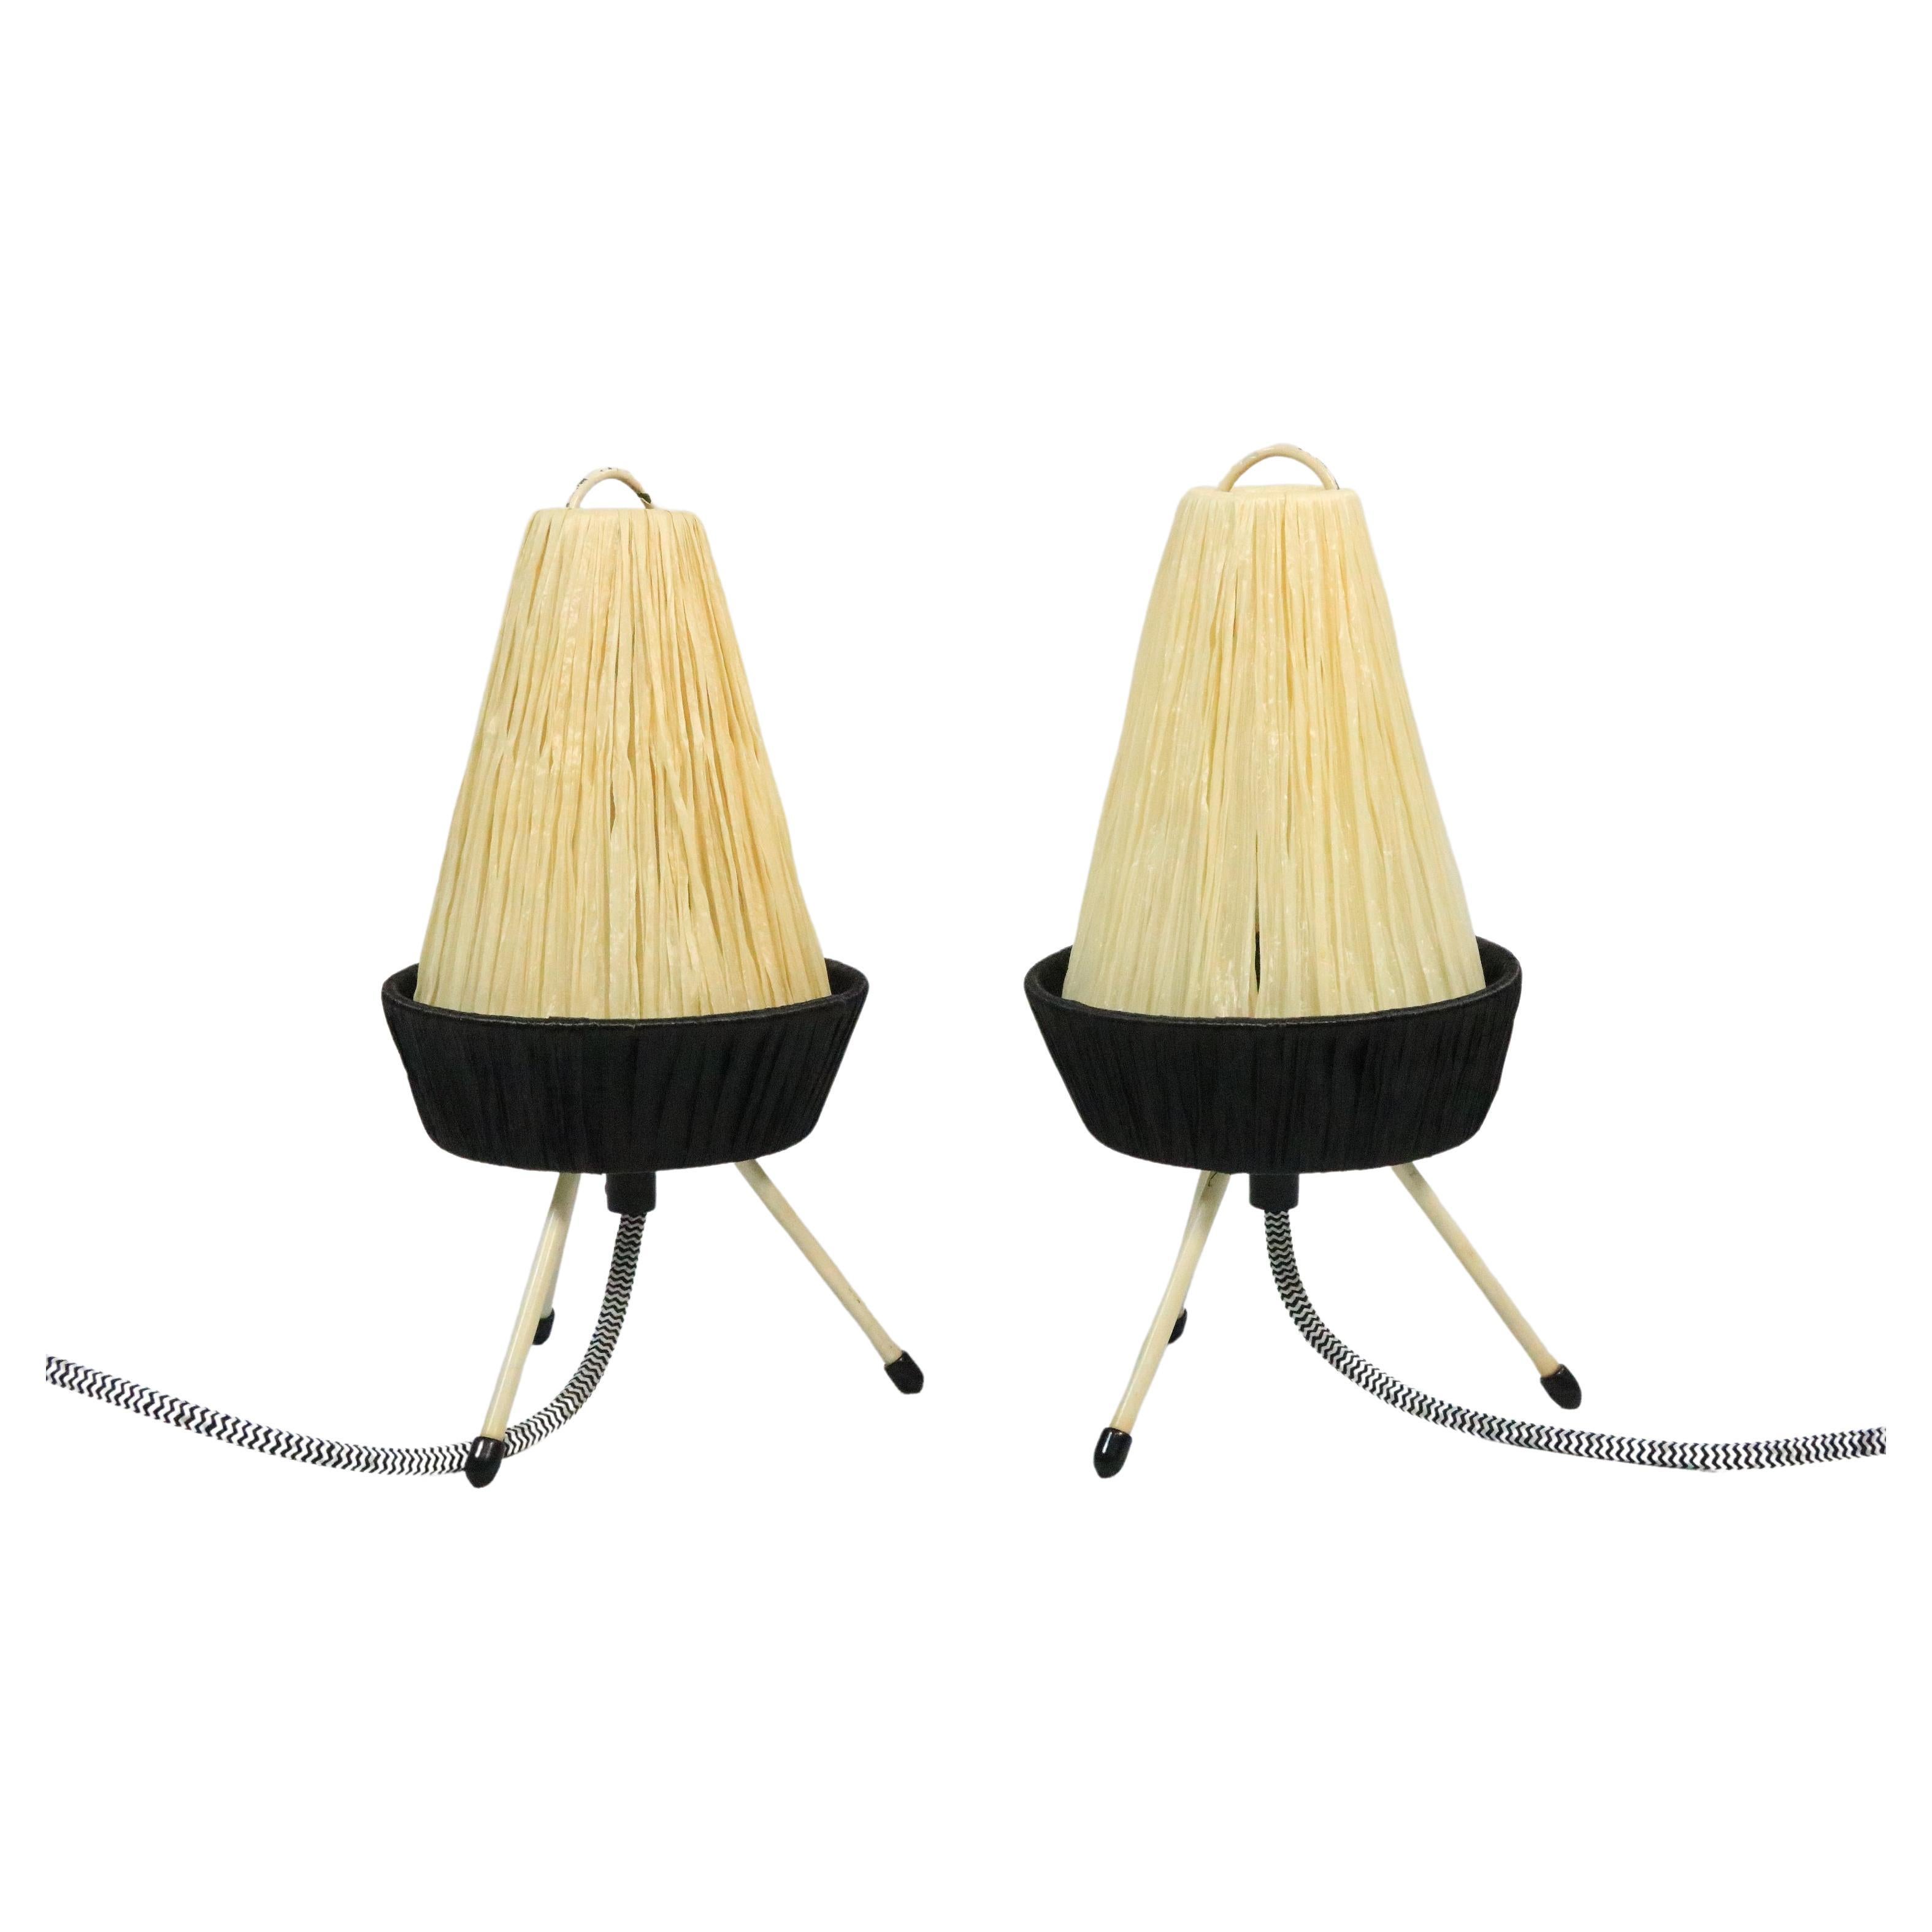 Set of 2 Filigree Table Lamps, Raffia Shade, Germany, Tripod, 1950s For Sale